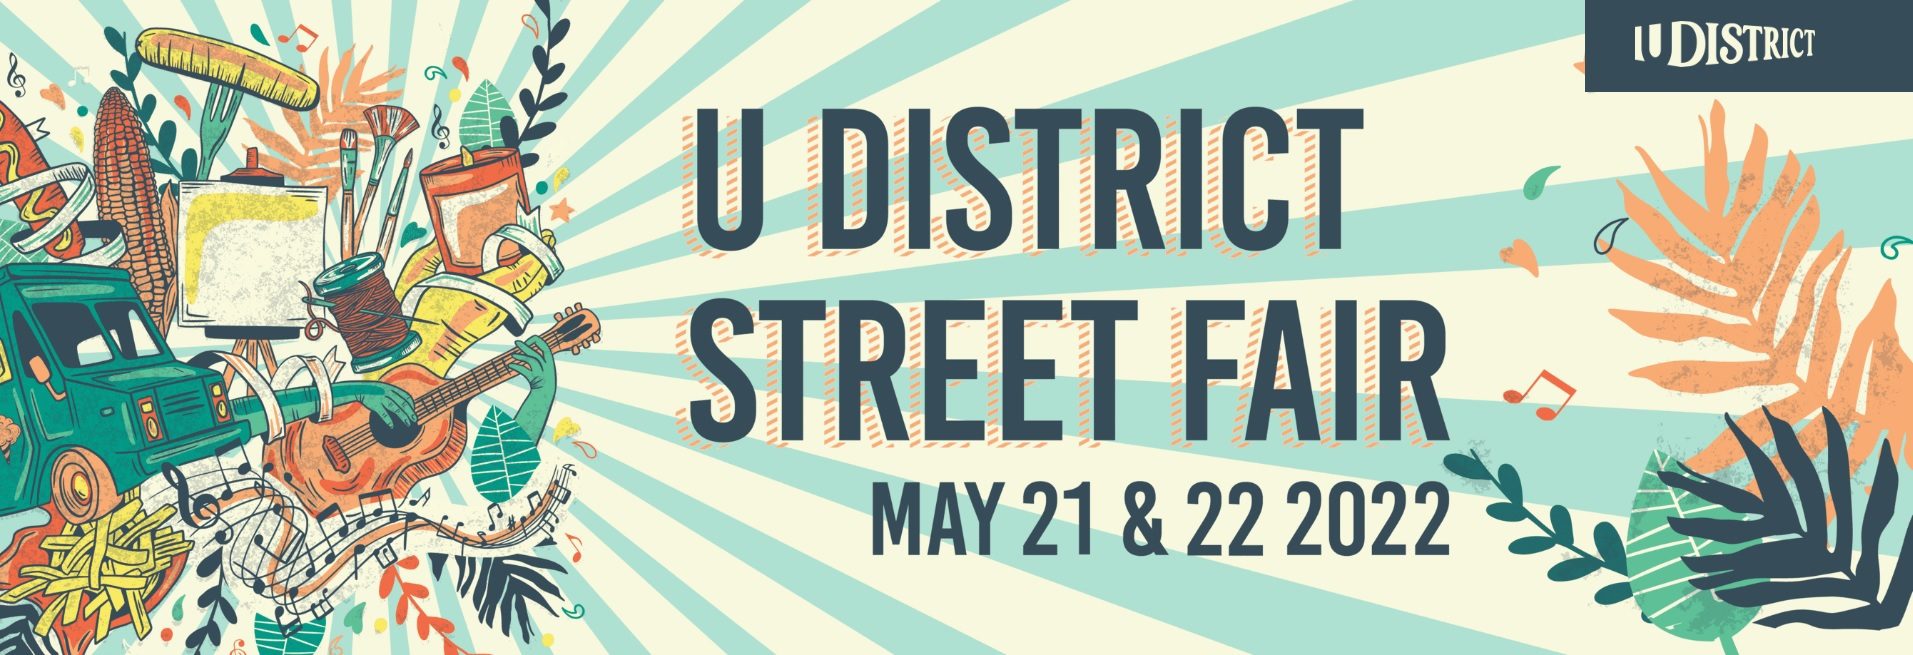 The University District Street Fair is this weekend, May 21 & 22, 2022.